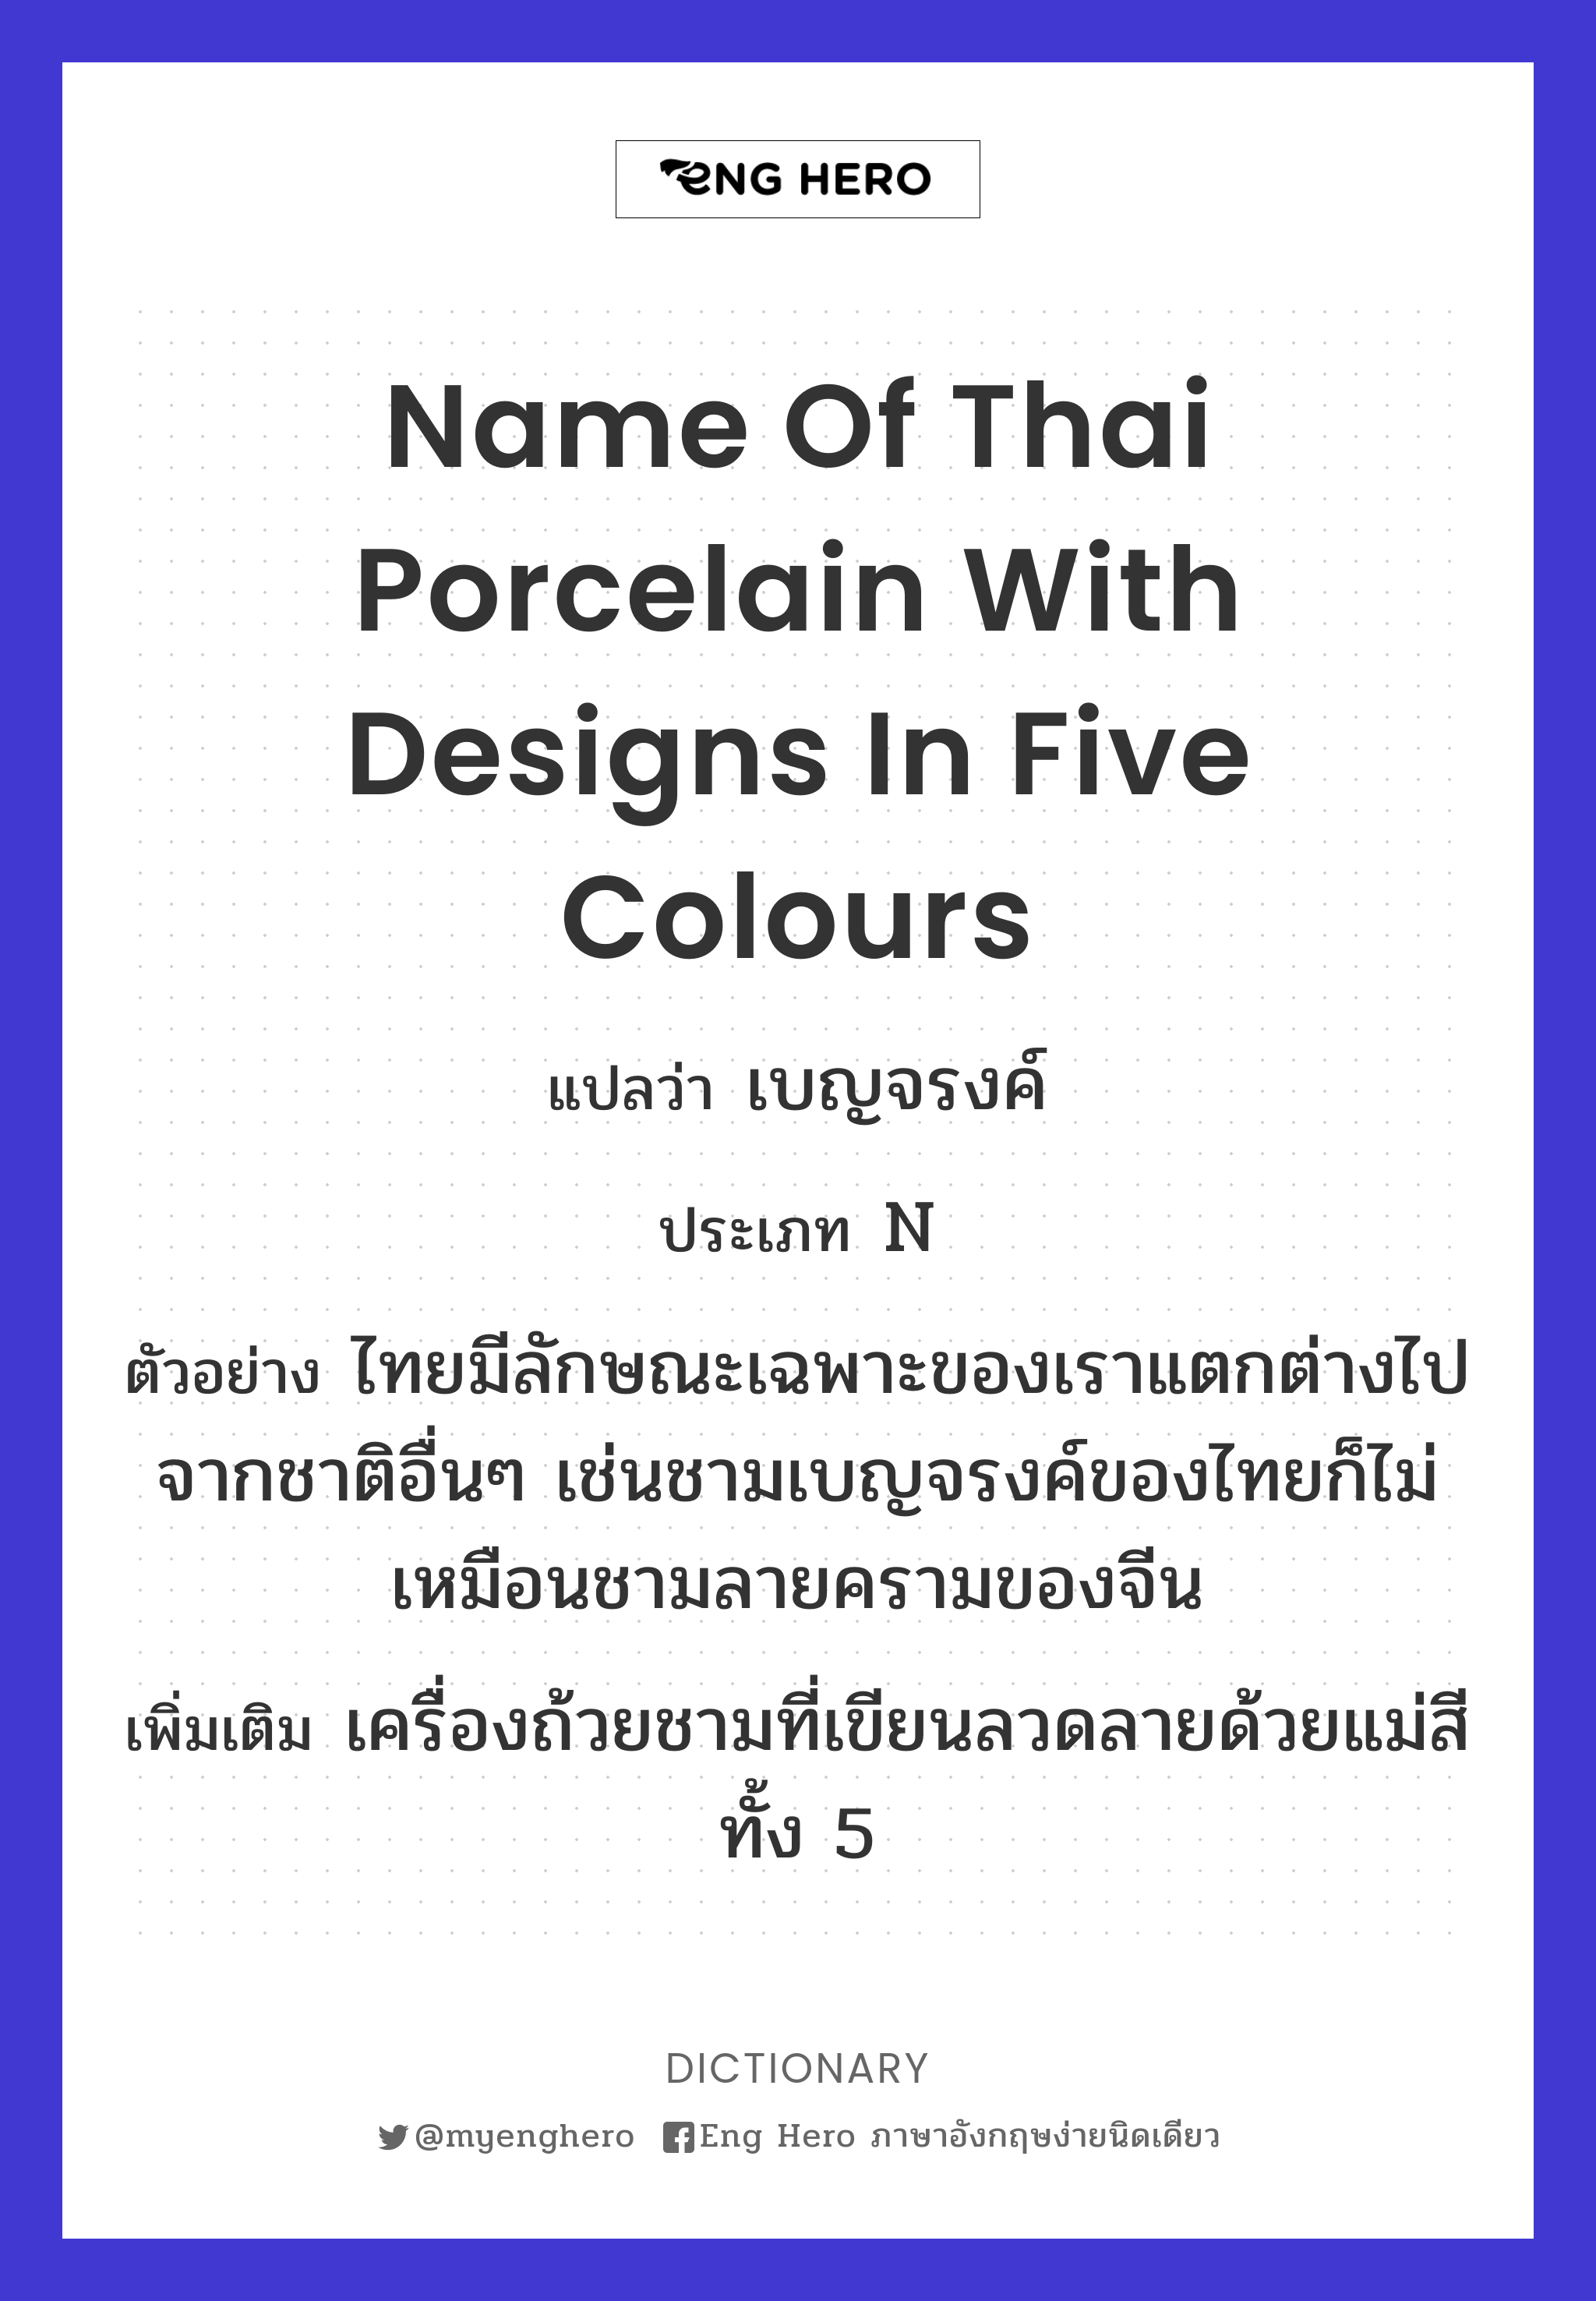 name of Thai porcelain with designs in five colours